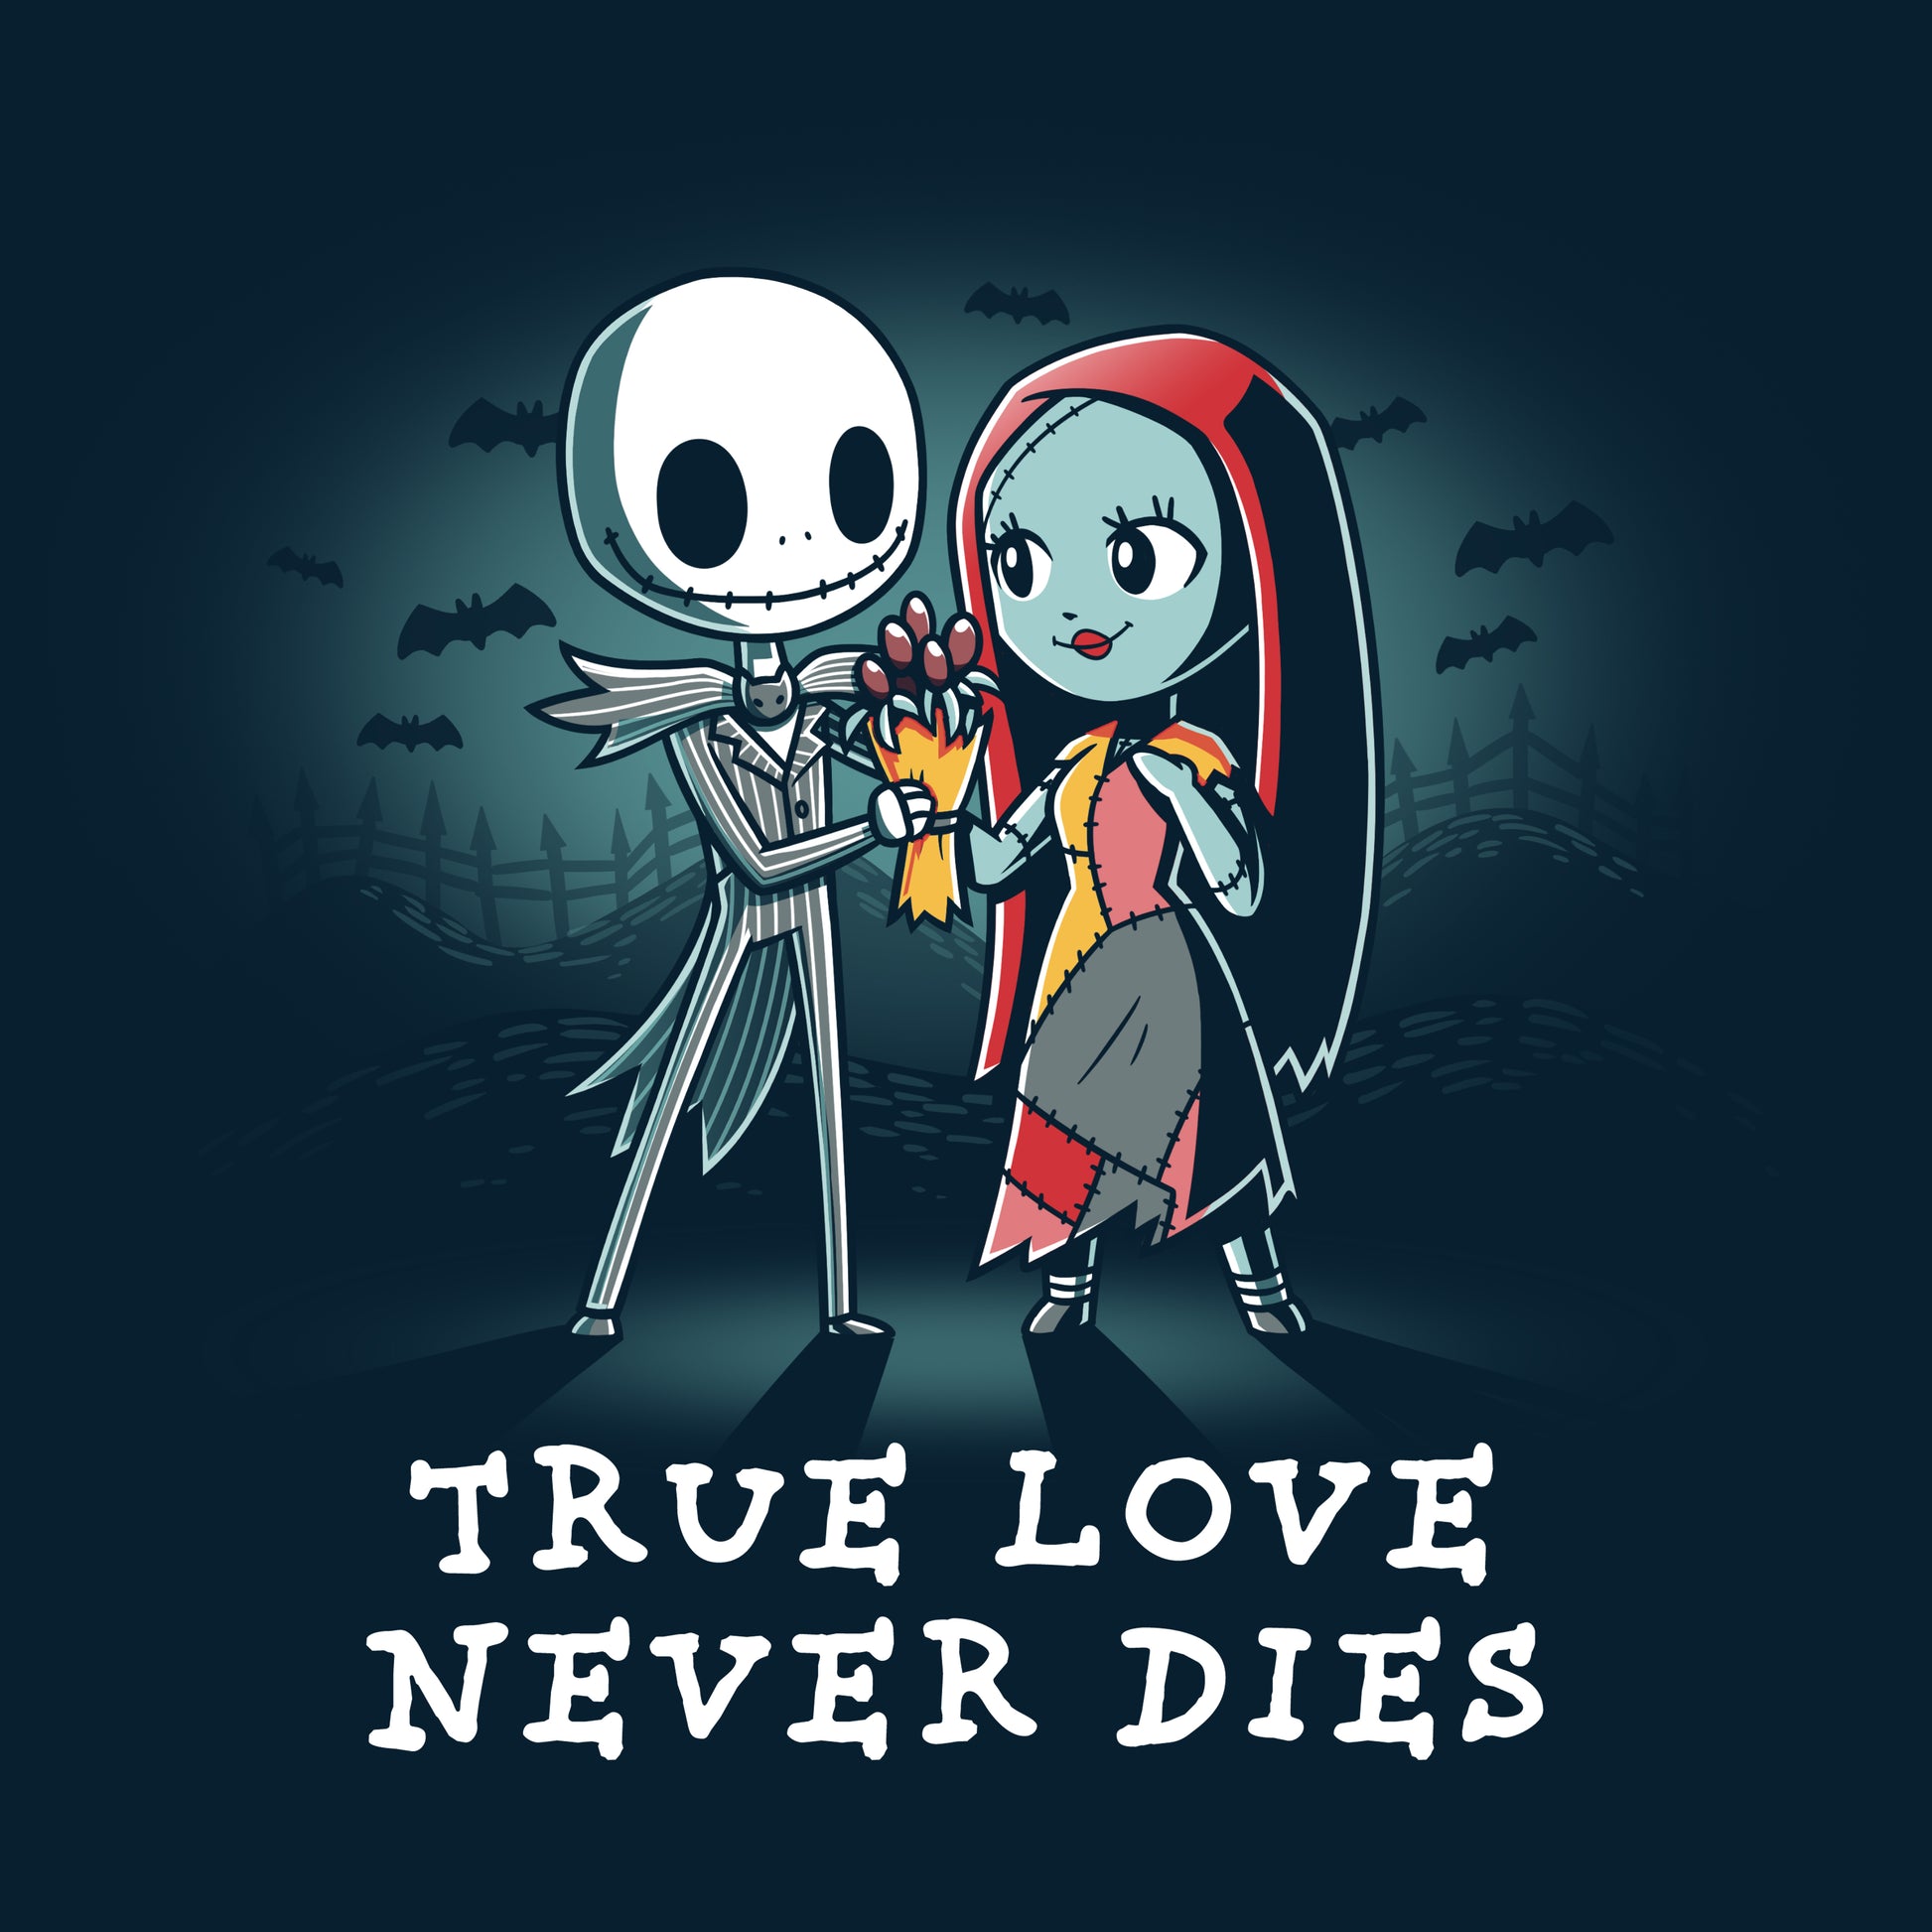 True love between Jack and Sally from The Nightmare Before Christmas never dies, thanks to the True Love Never Dies brand by Disney.